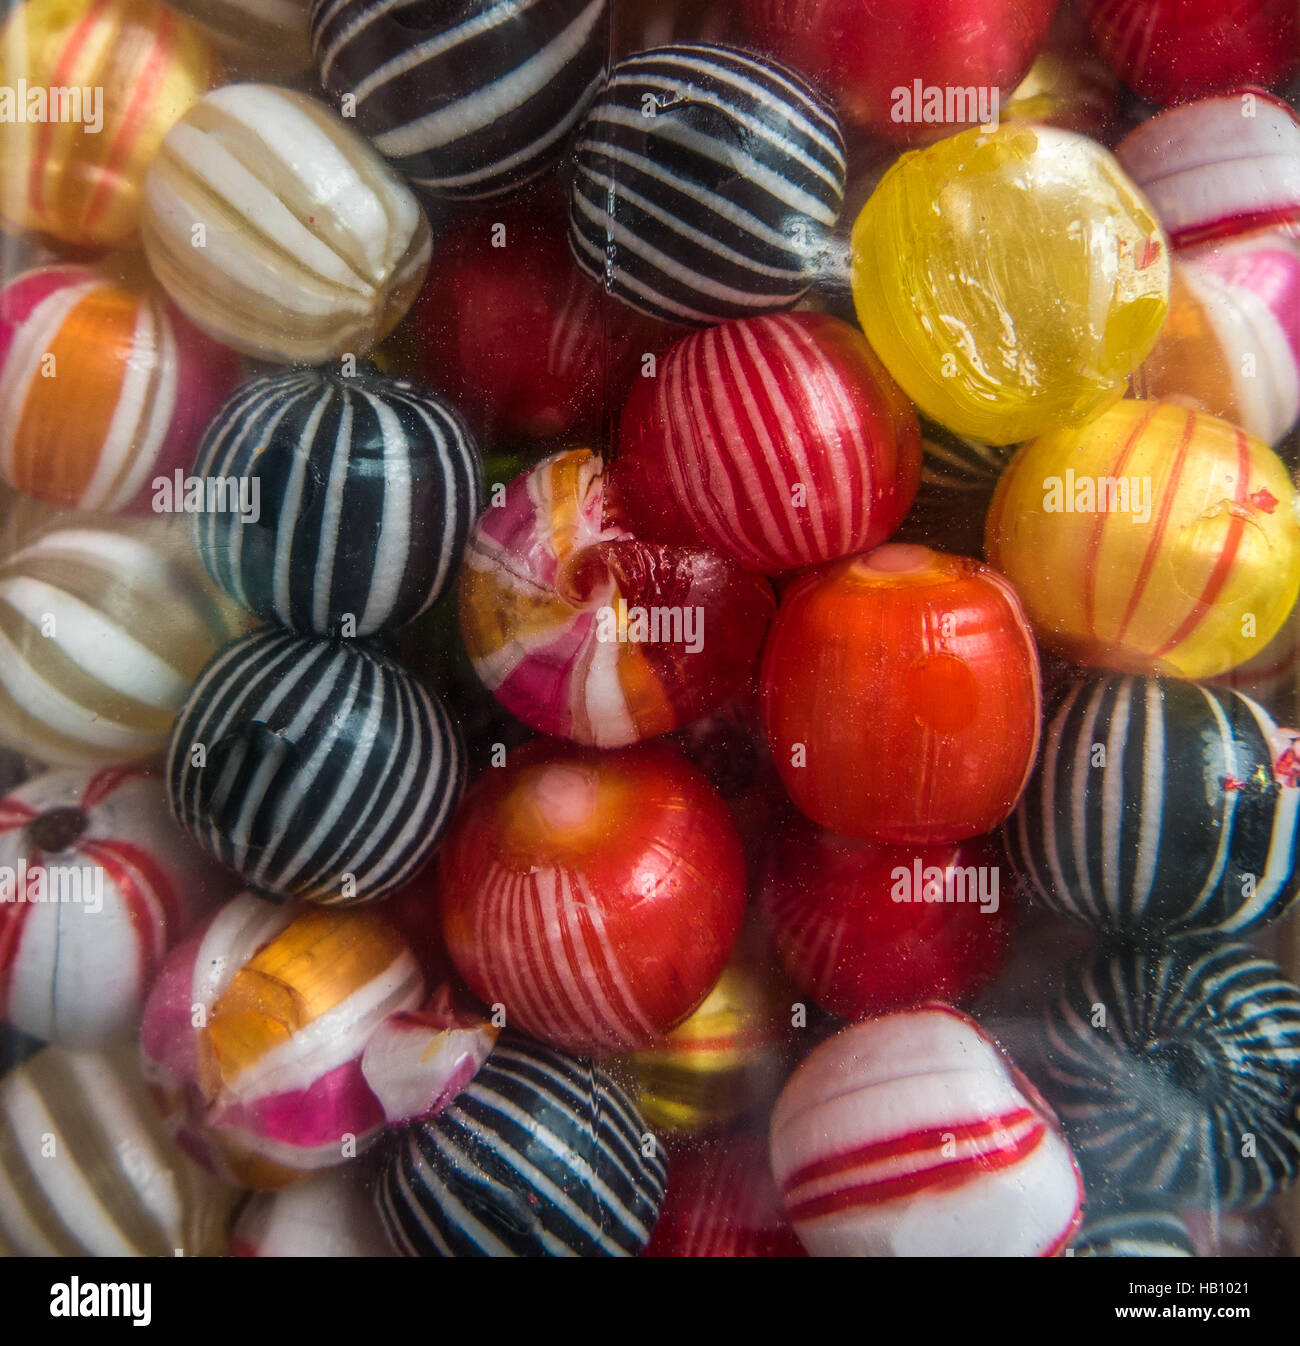 Retro Vintage Hard Boiled Sweets Or Candy In A Jar Stock Photo